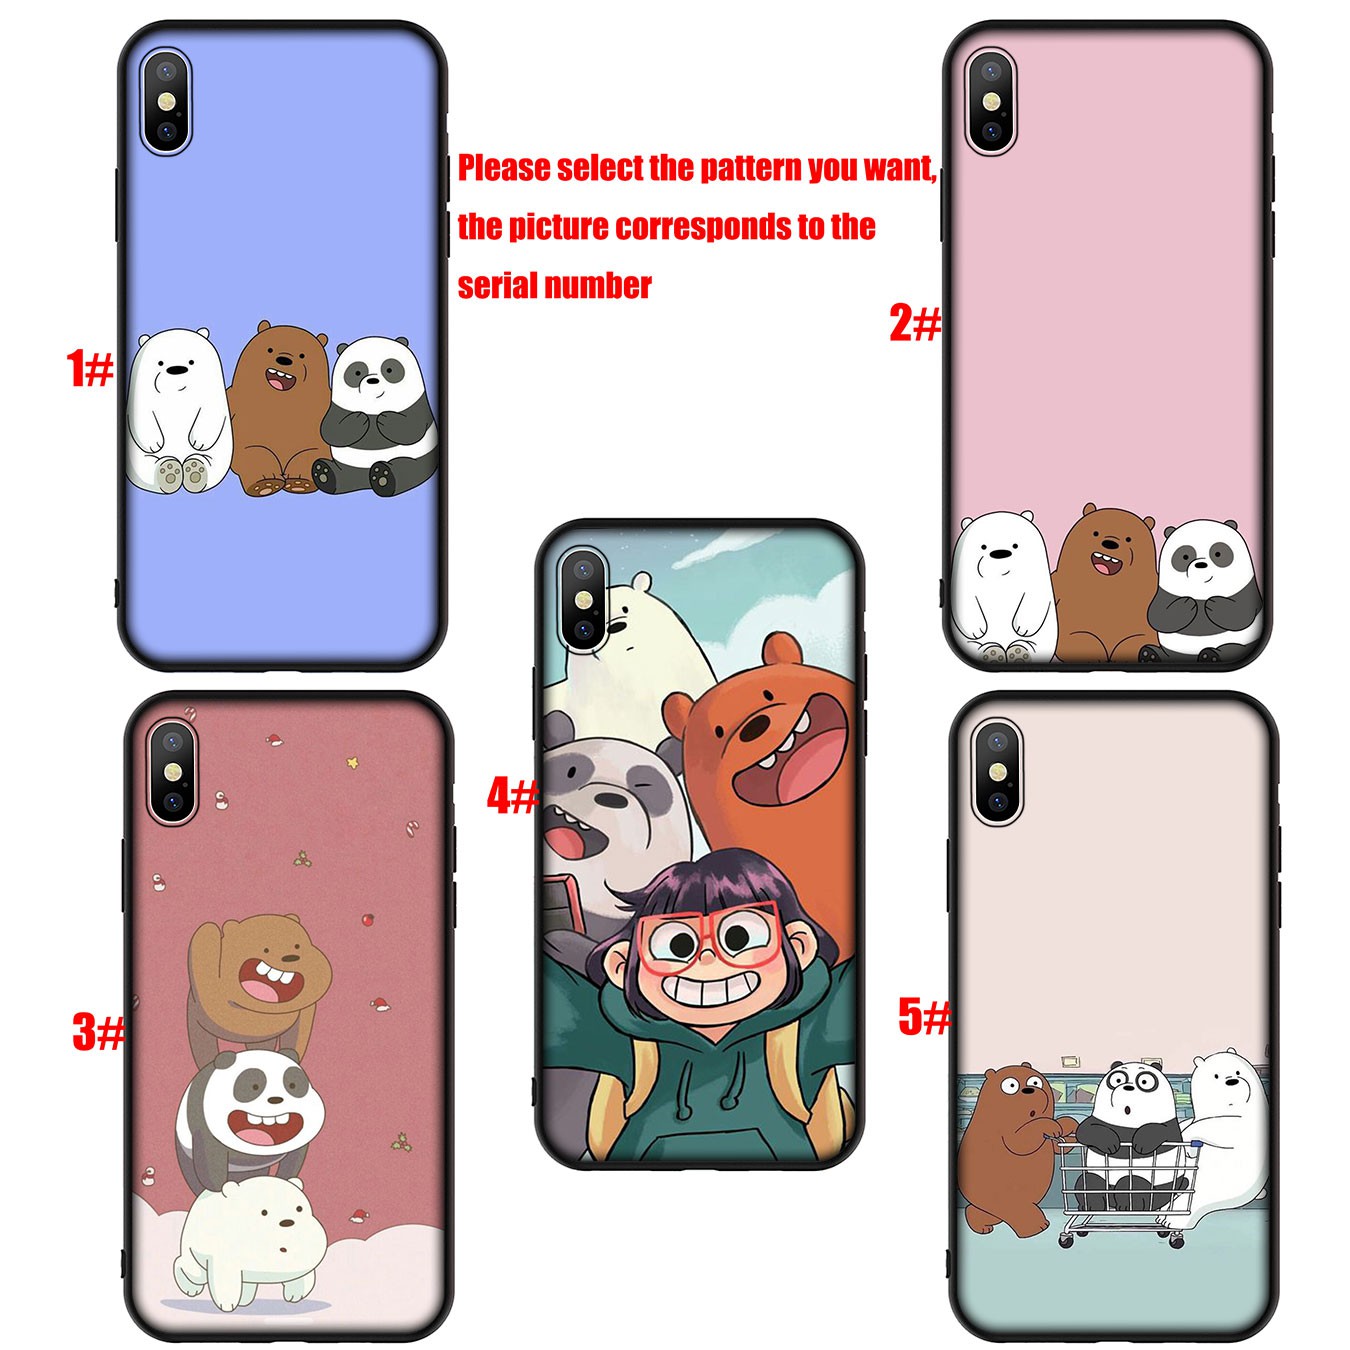 Samsung Galaxy A02S J2 J4 J5 J6 Plus J7 Prime A02 M02 j6+ A42 + Casing Soft Silicone Phone Case H75 We Bare Bears Cover